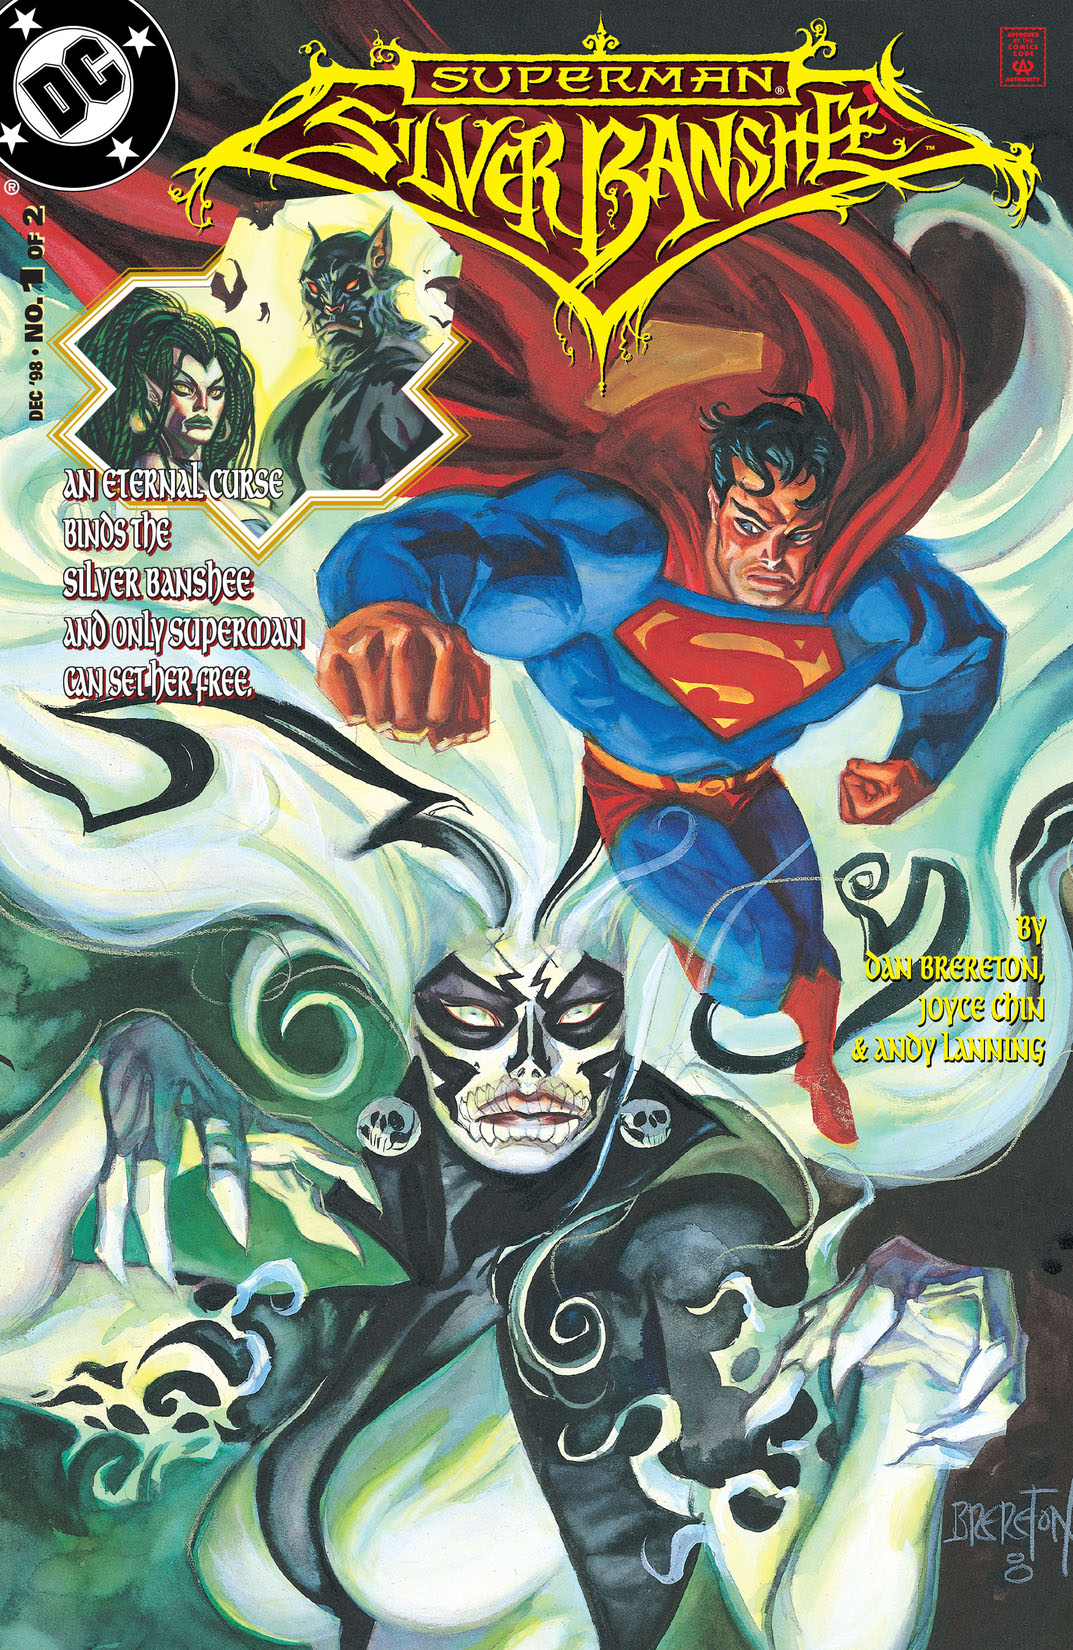 Superman: Silver Banshee (1998-) #1 preview images